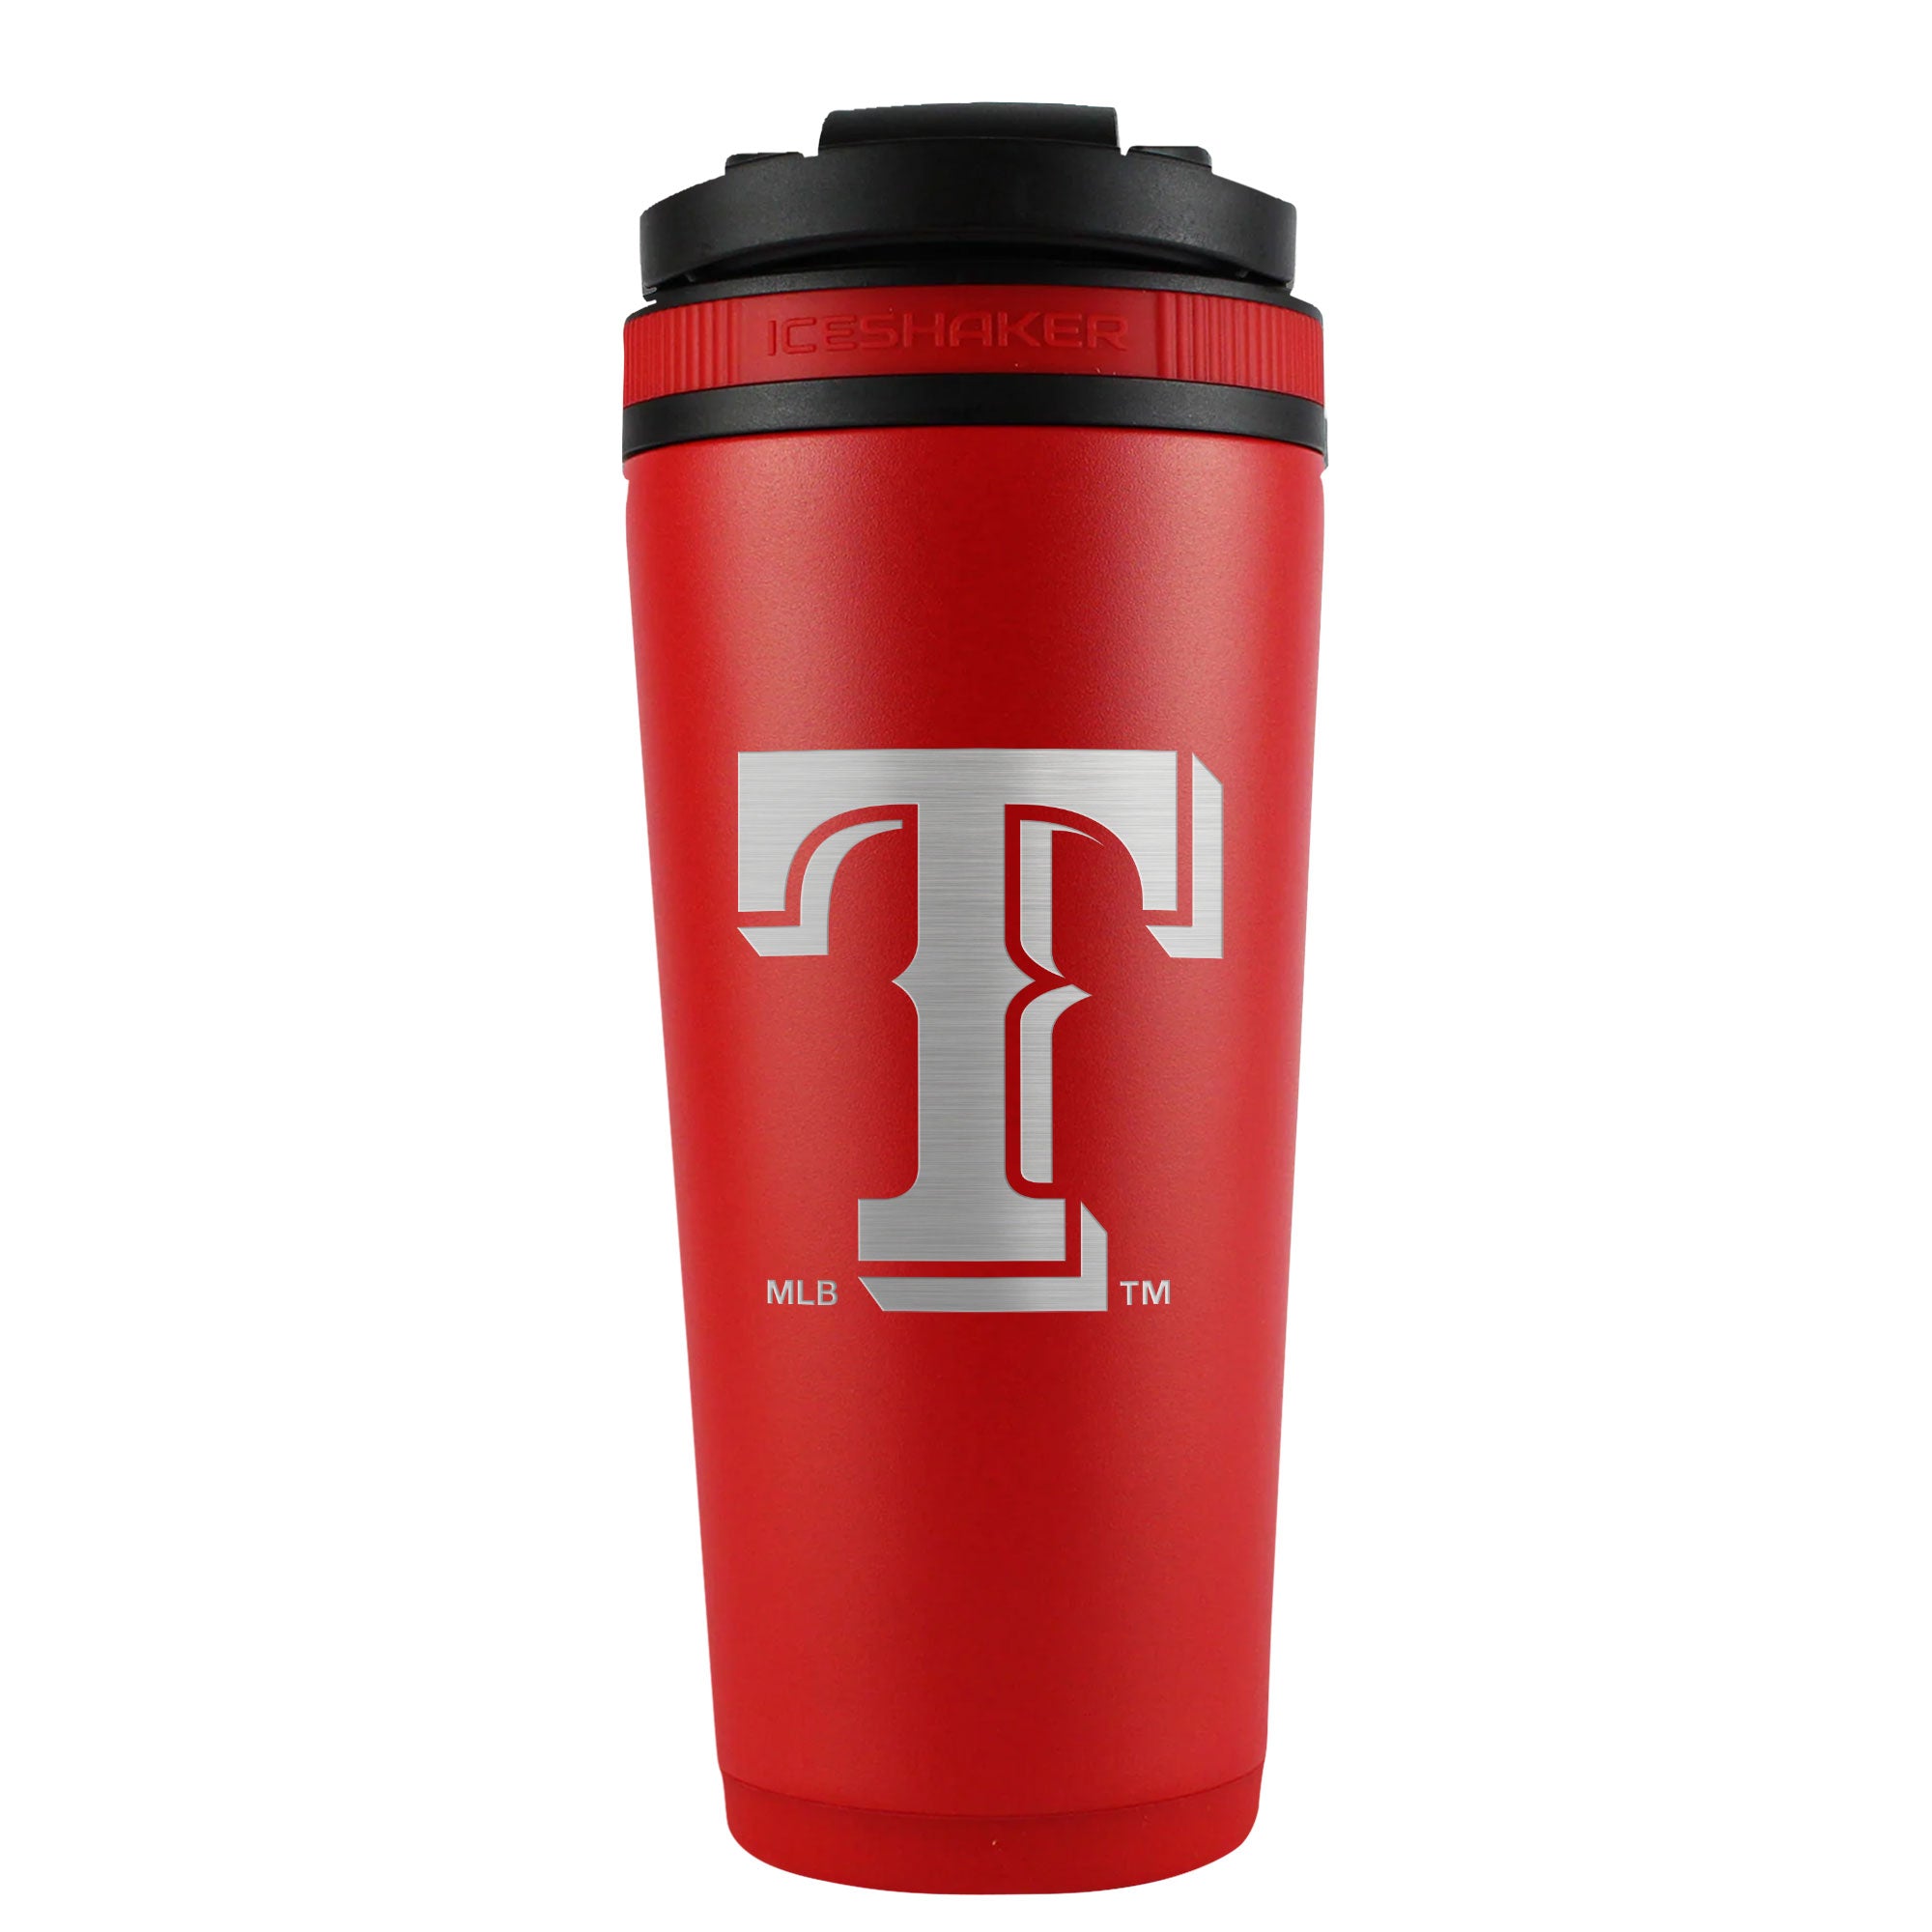 Officially Licensed Texas Rangers 26oz Ice Shaker - Red